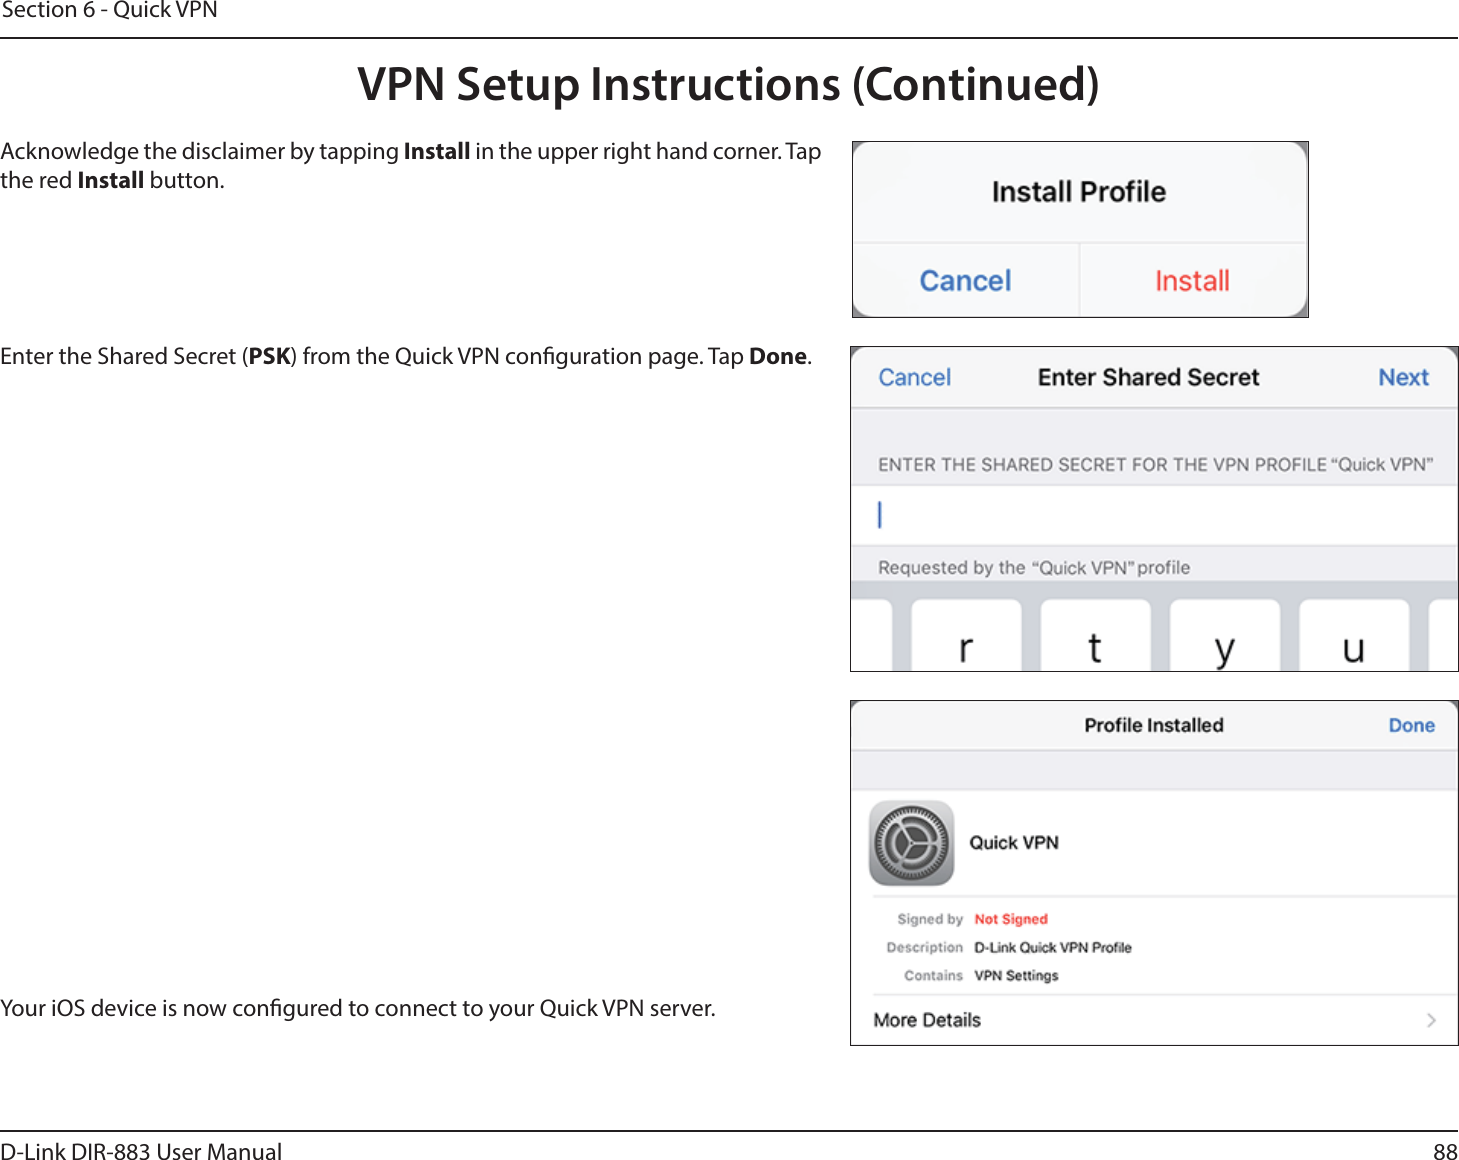 88D-Link DIR-883 User ManualSection 6 - Quick VPNYour iOS device is now congured to connect to your Quick VPN server.Enter the Shared Secret (PSK) from the Quick VPN conguration page. Tap Done.Acknowledge the disclaimer by tapping Install in the upper right hand corner. Tap the red Install button.VPN Setup Instructions (Continued)